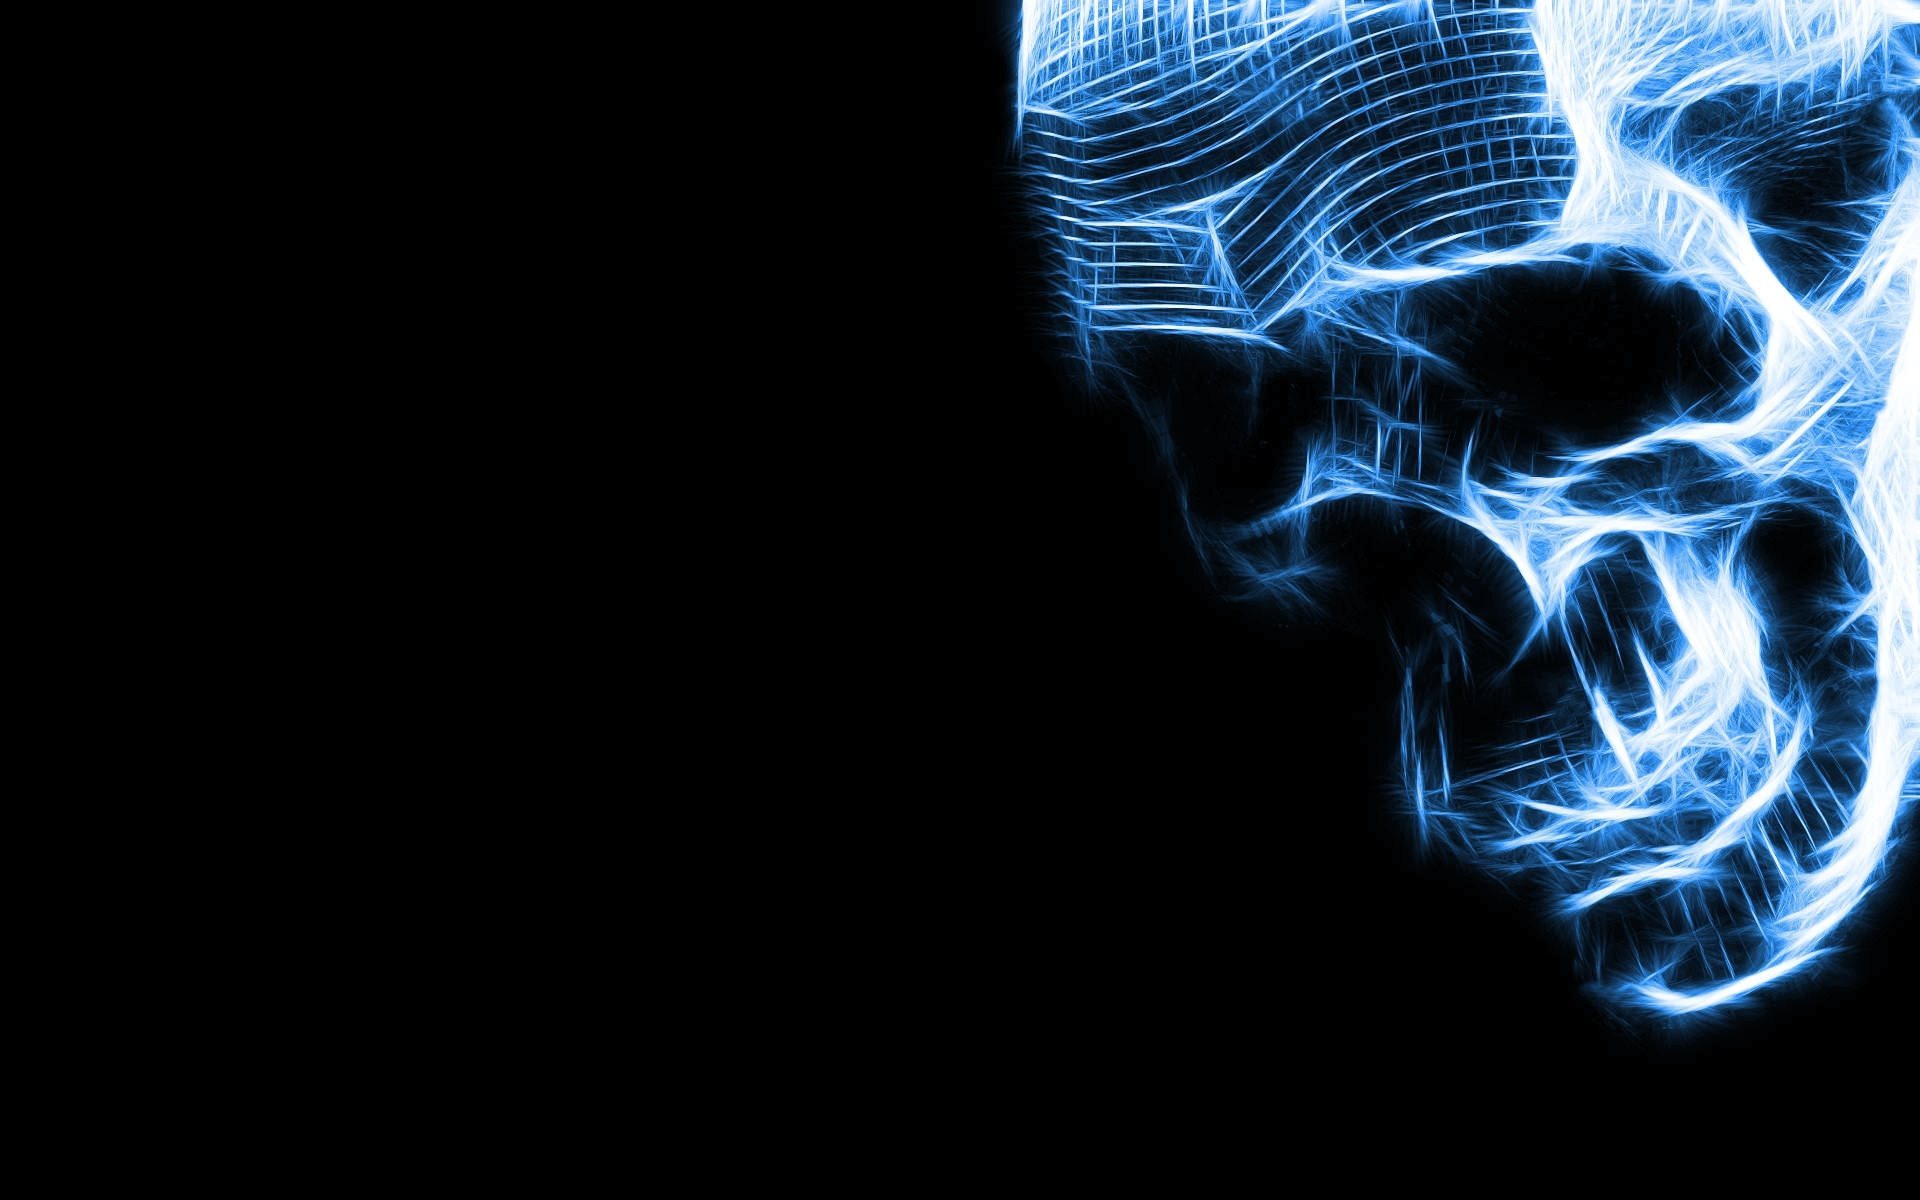 Download wallpaper skull, neon, black background, saver for desktop with resolution 1920x1200. High Quality HD picture wallpaper